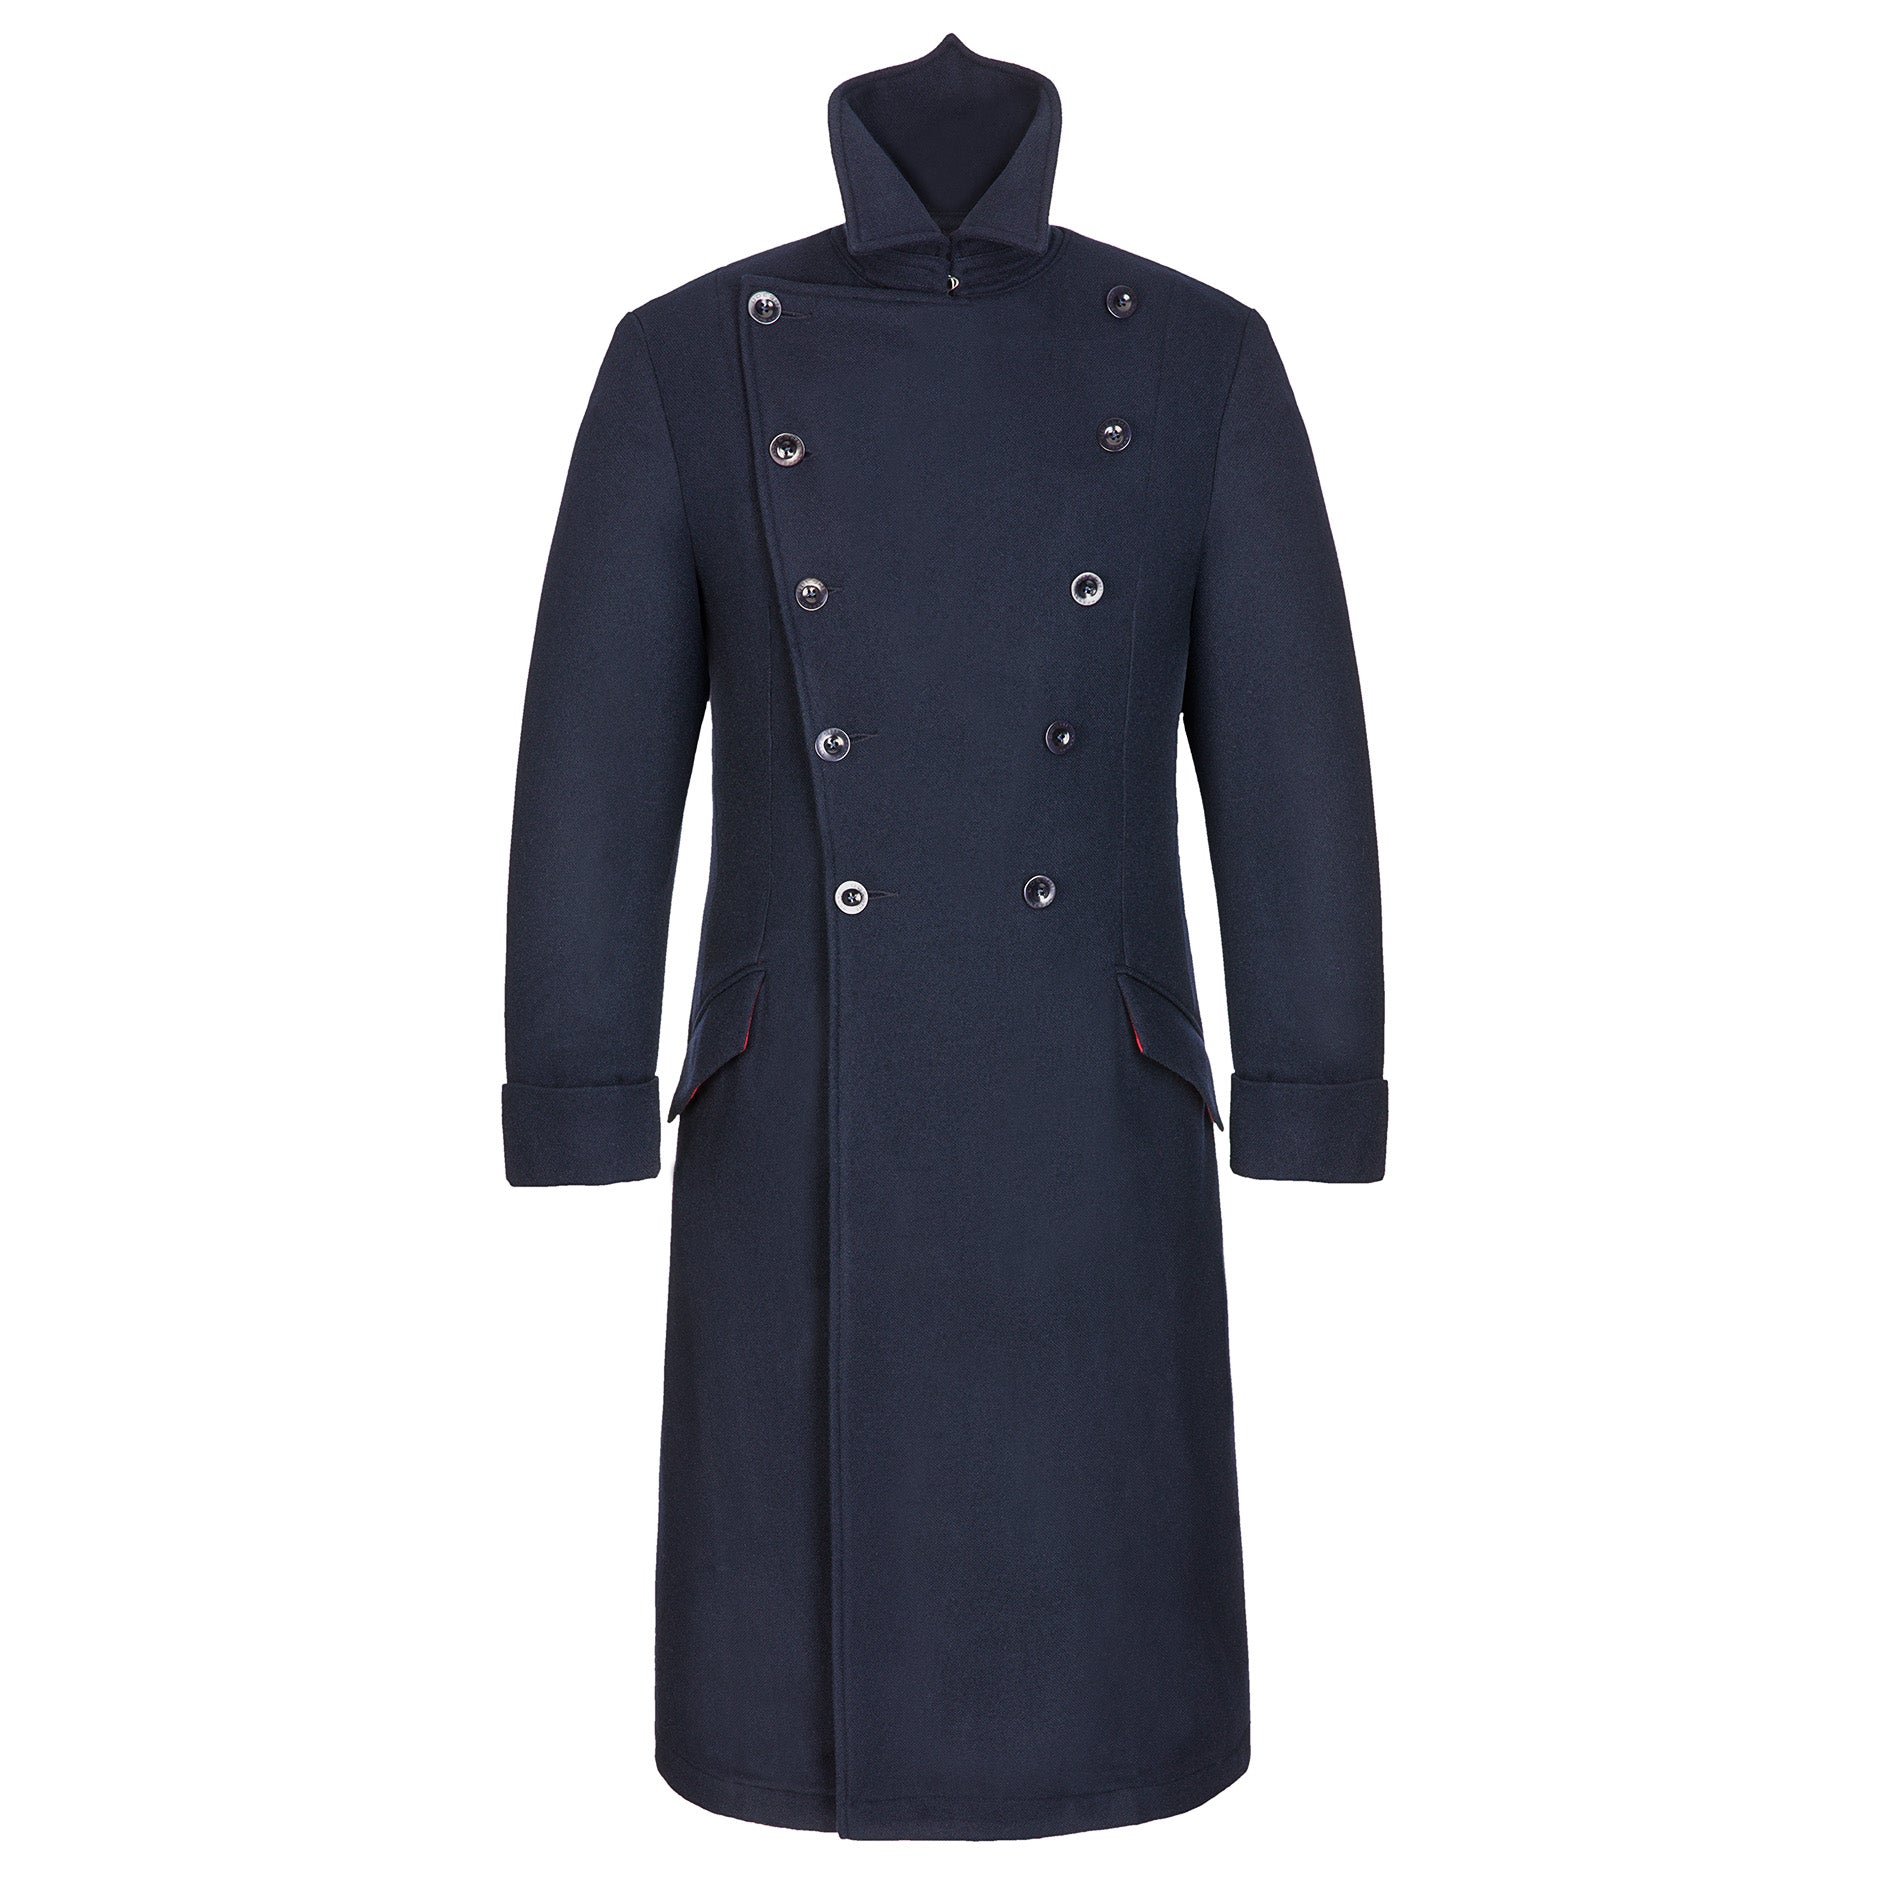 great coat from udeshi closed